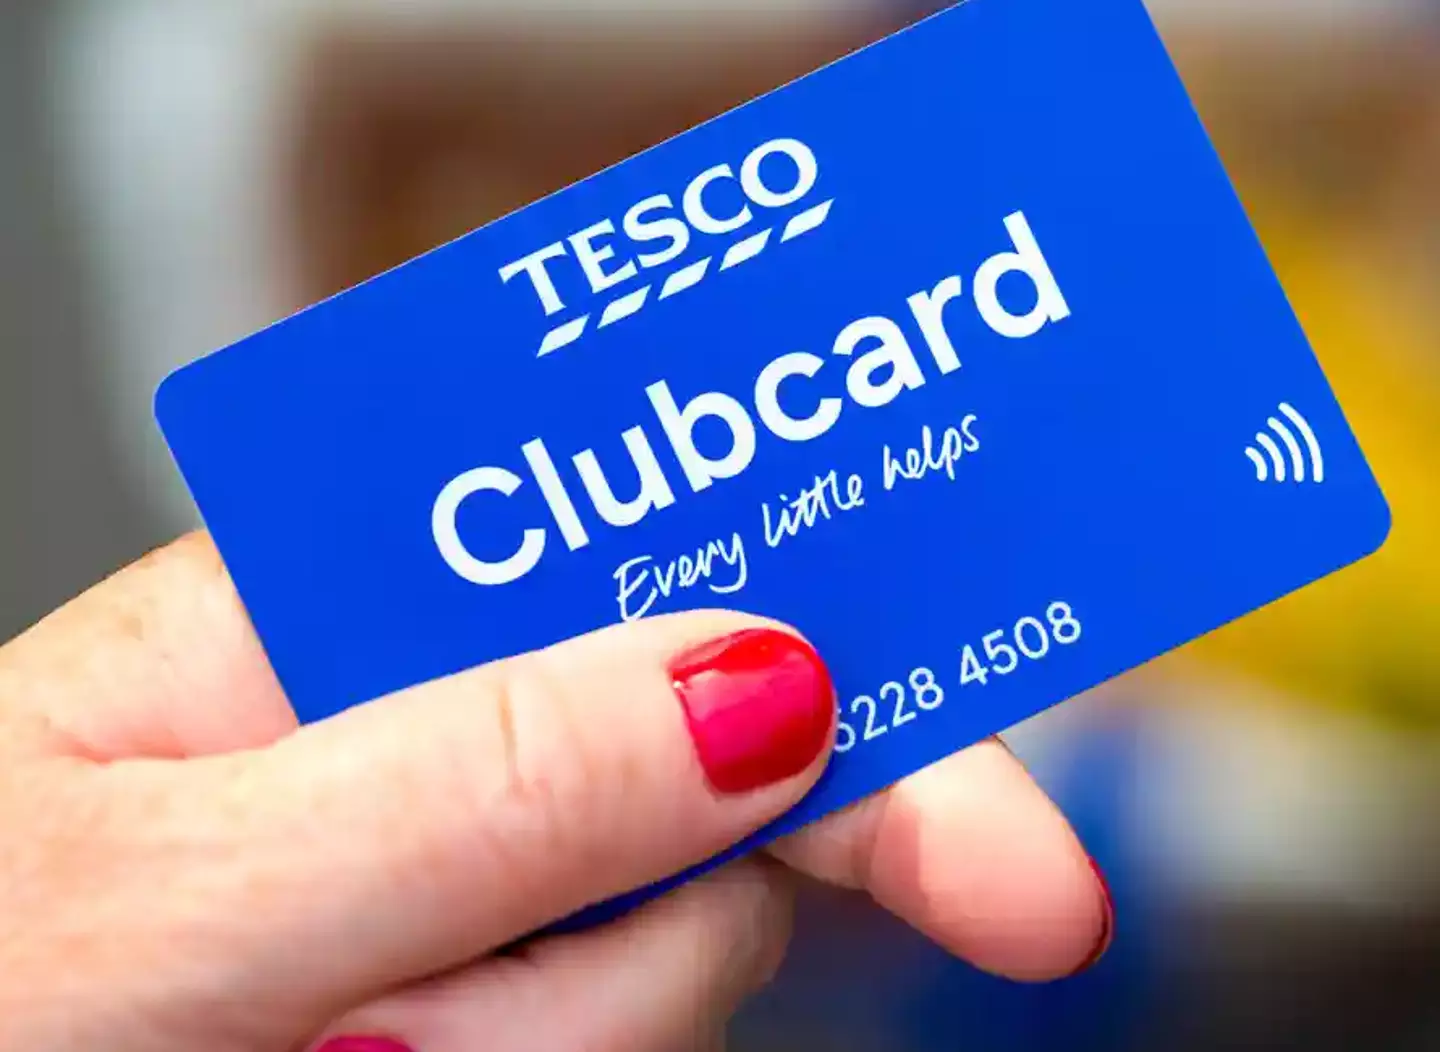 Tesco has announced changes to its Clubcard scheme.